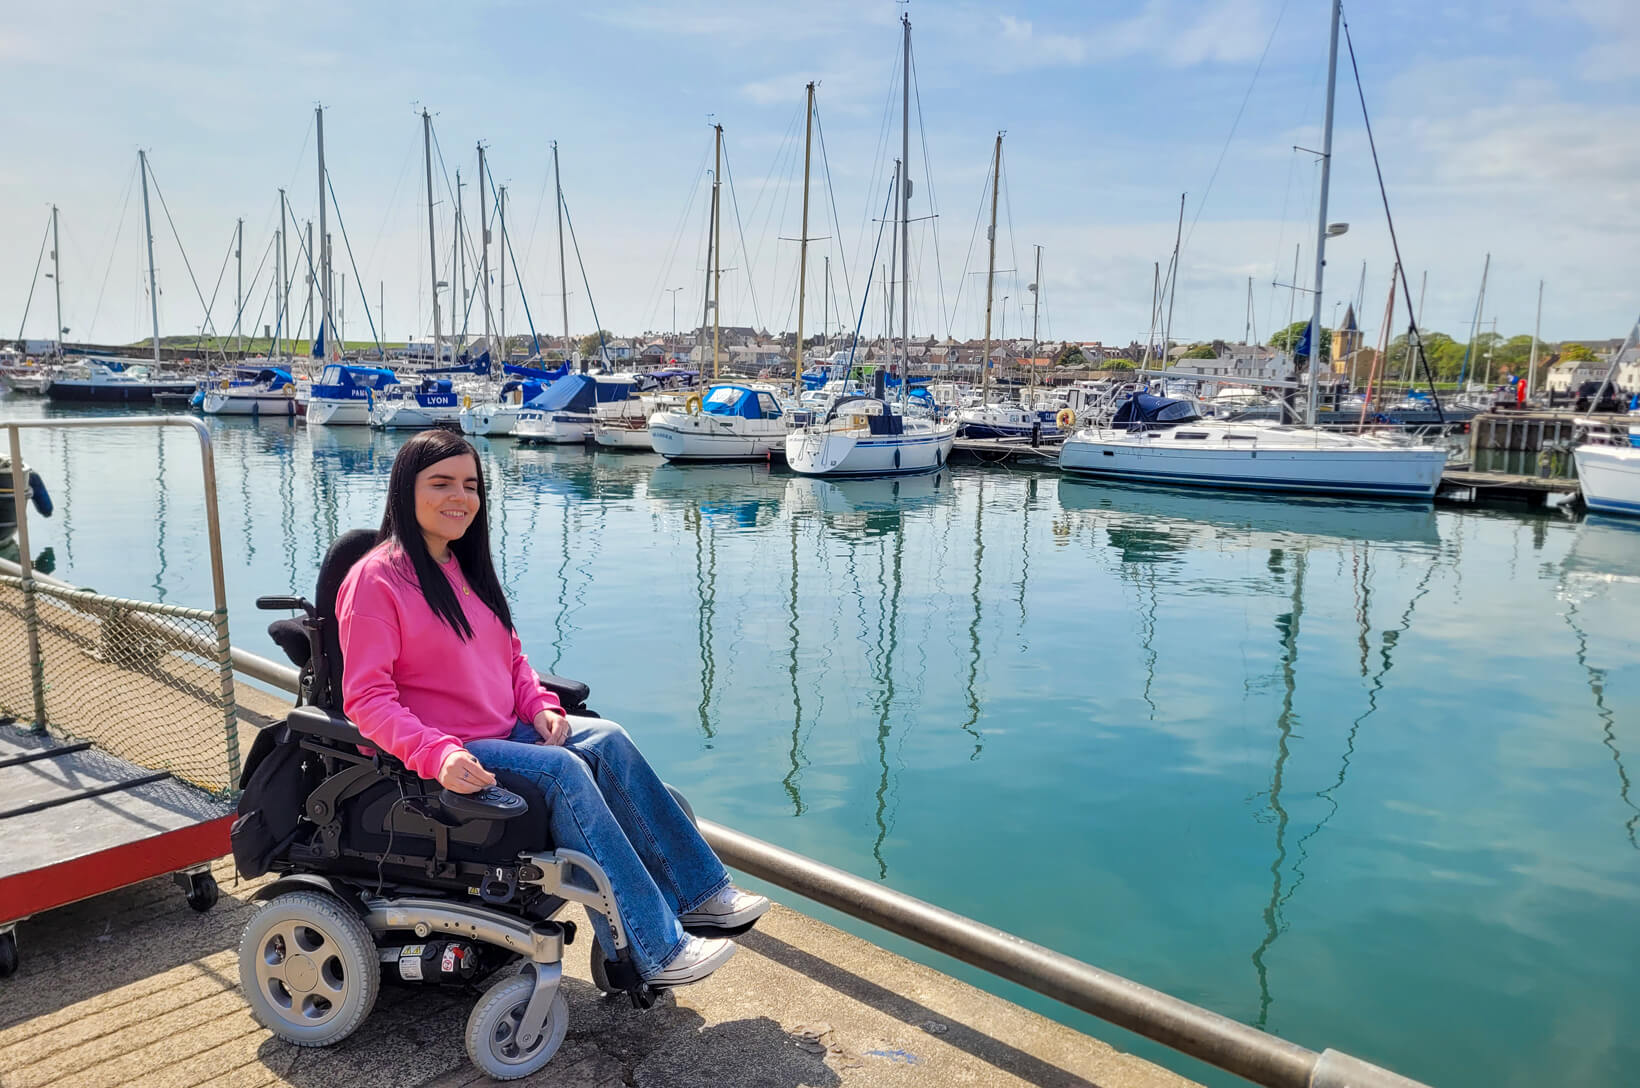 Emma sat in her wheelchair at Anstruther Harbour. The water is turquoise colour and there are numerous boats behind her. Emma has long black hair and wearing a pink sweatshirt.